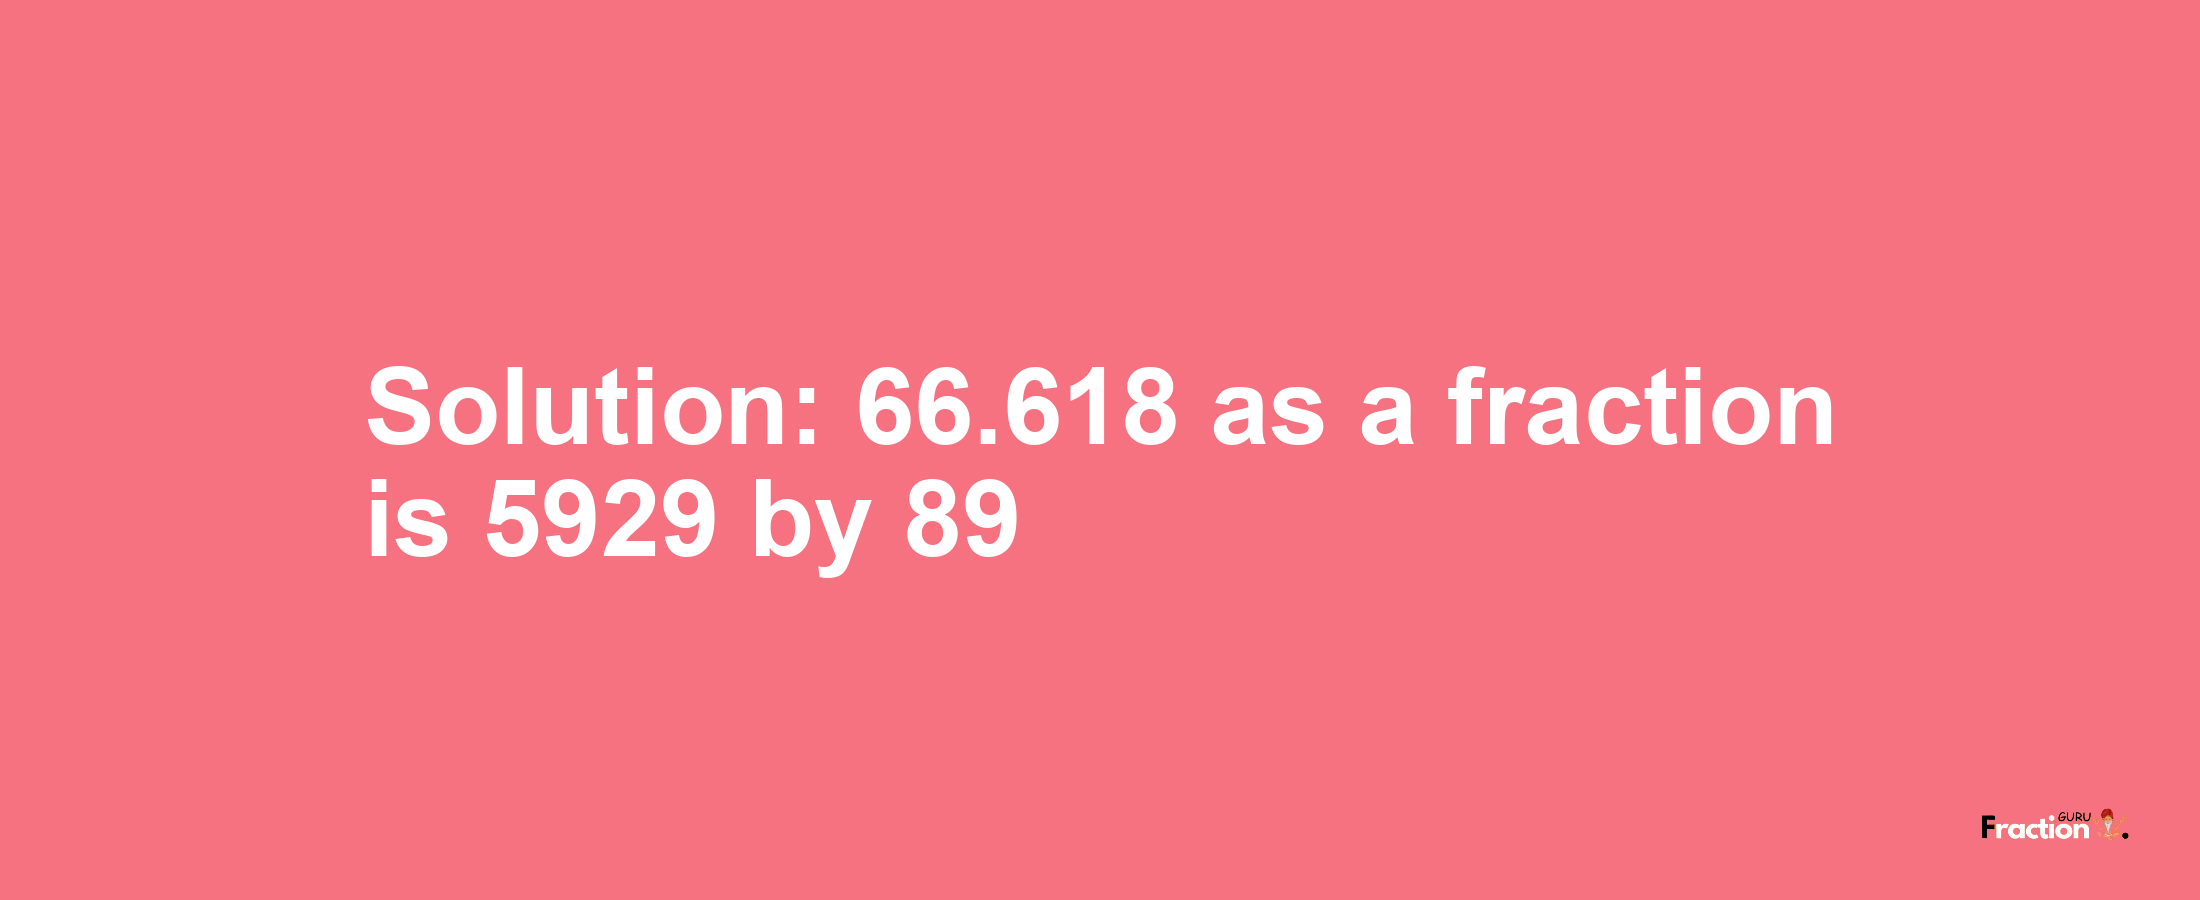 Solution:66.618 as a fraction is 5929/89